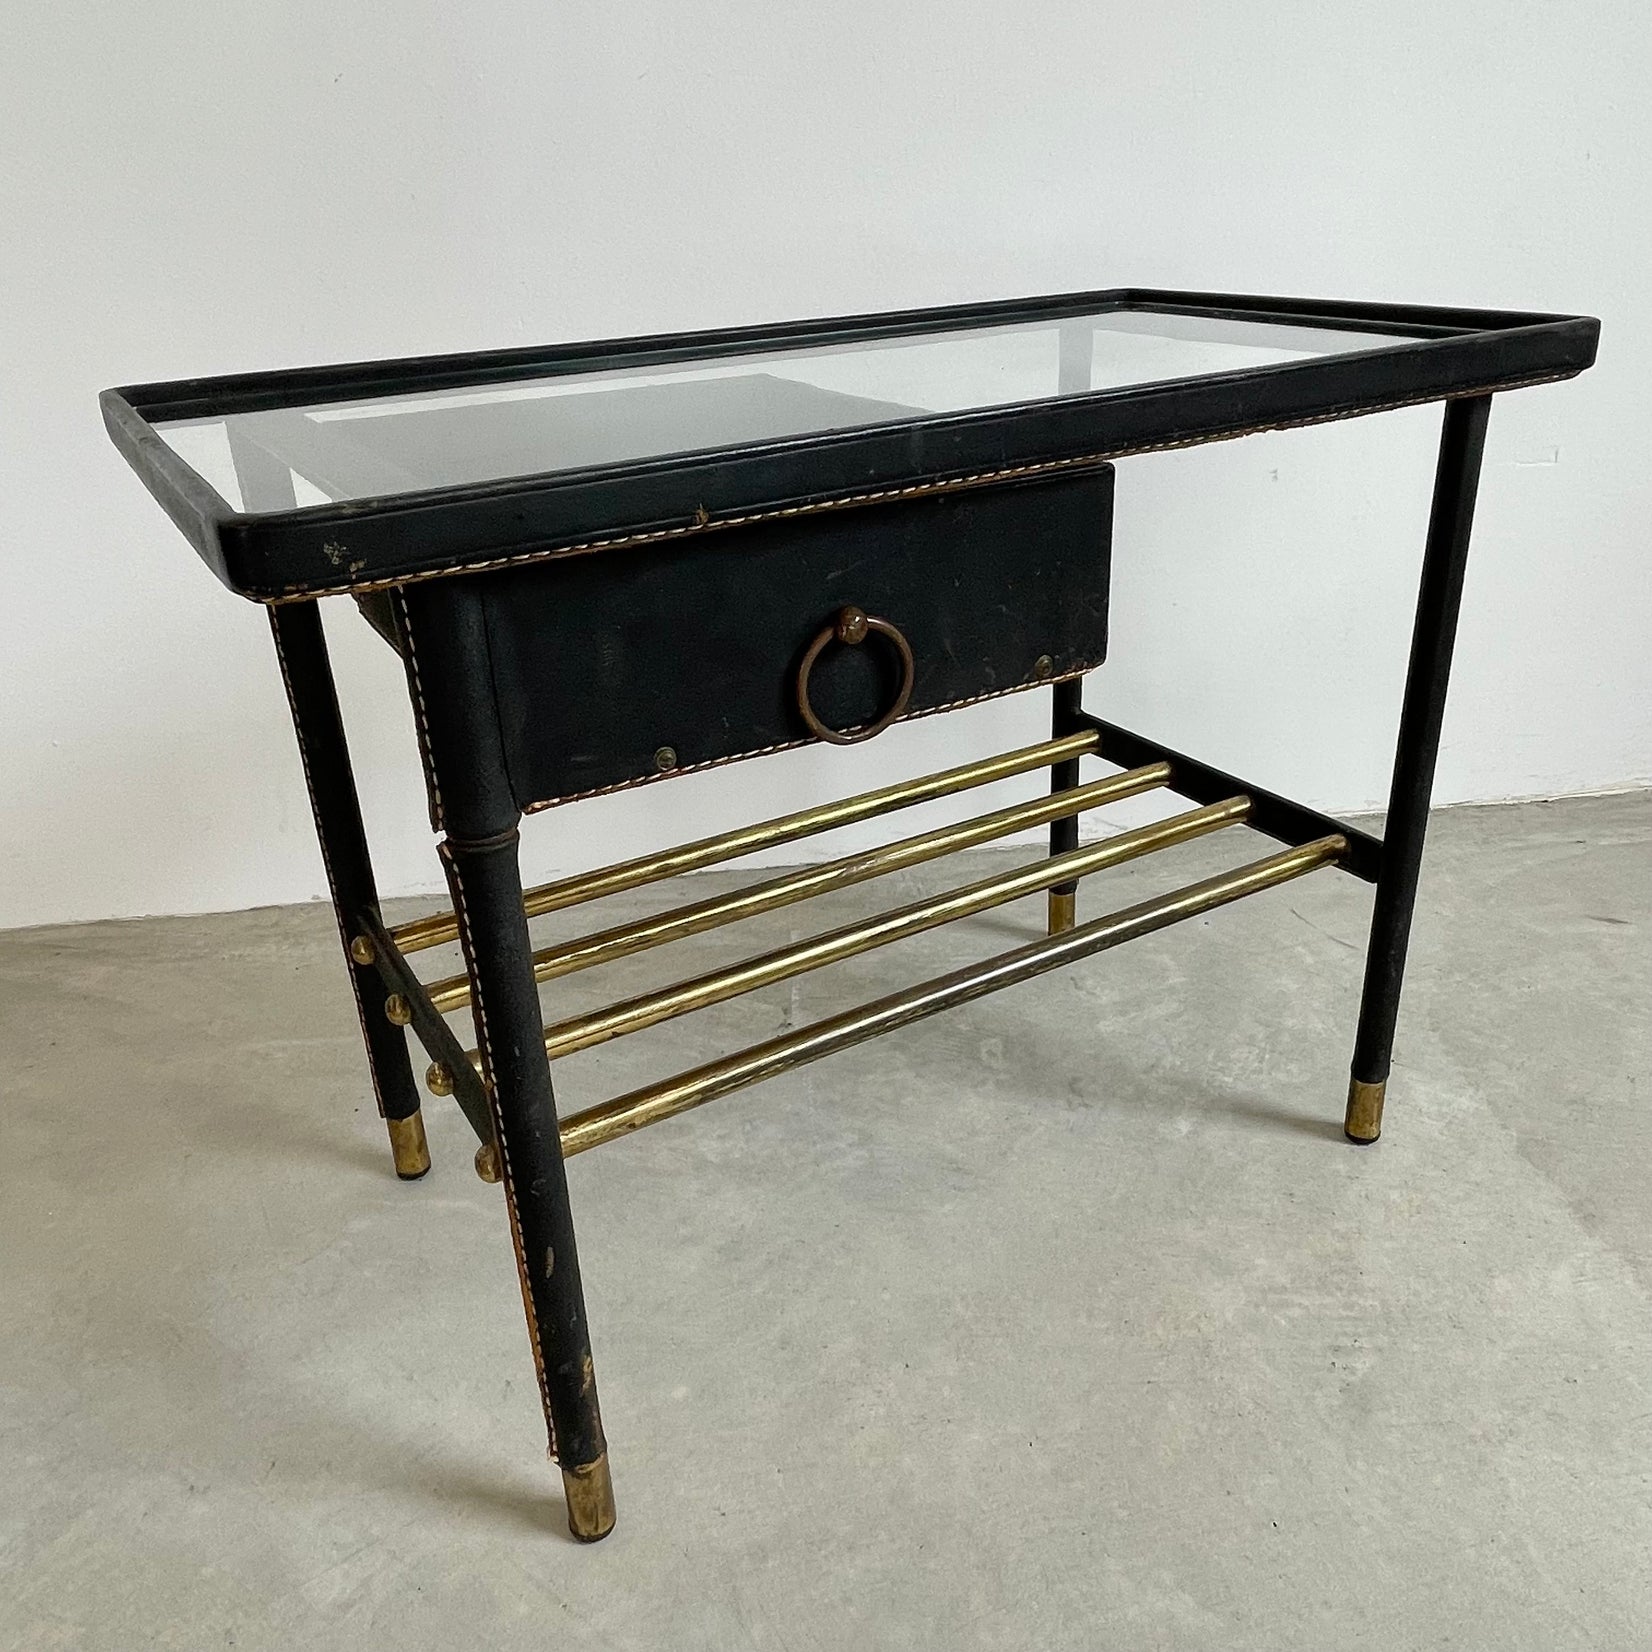 Jacques Adnet Leather Side Table with Drawer, 1950s